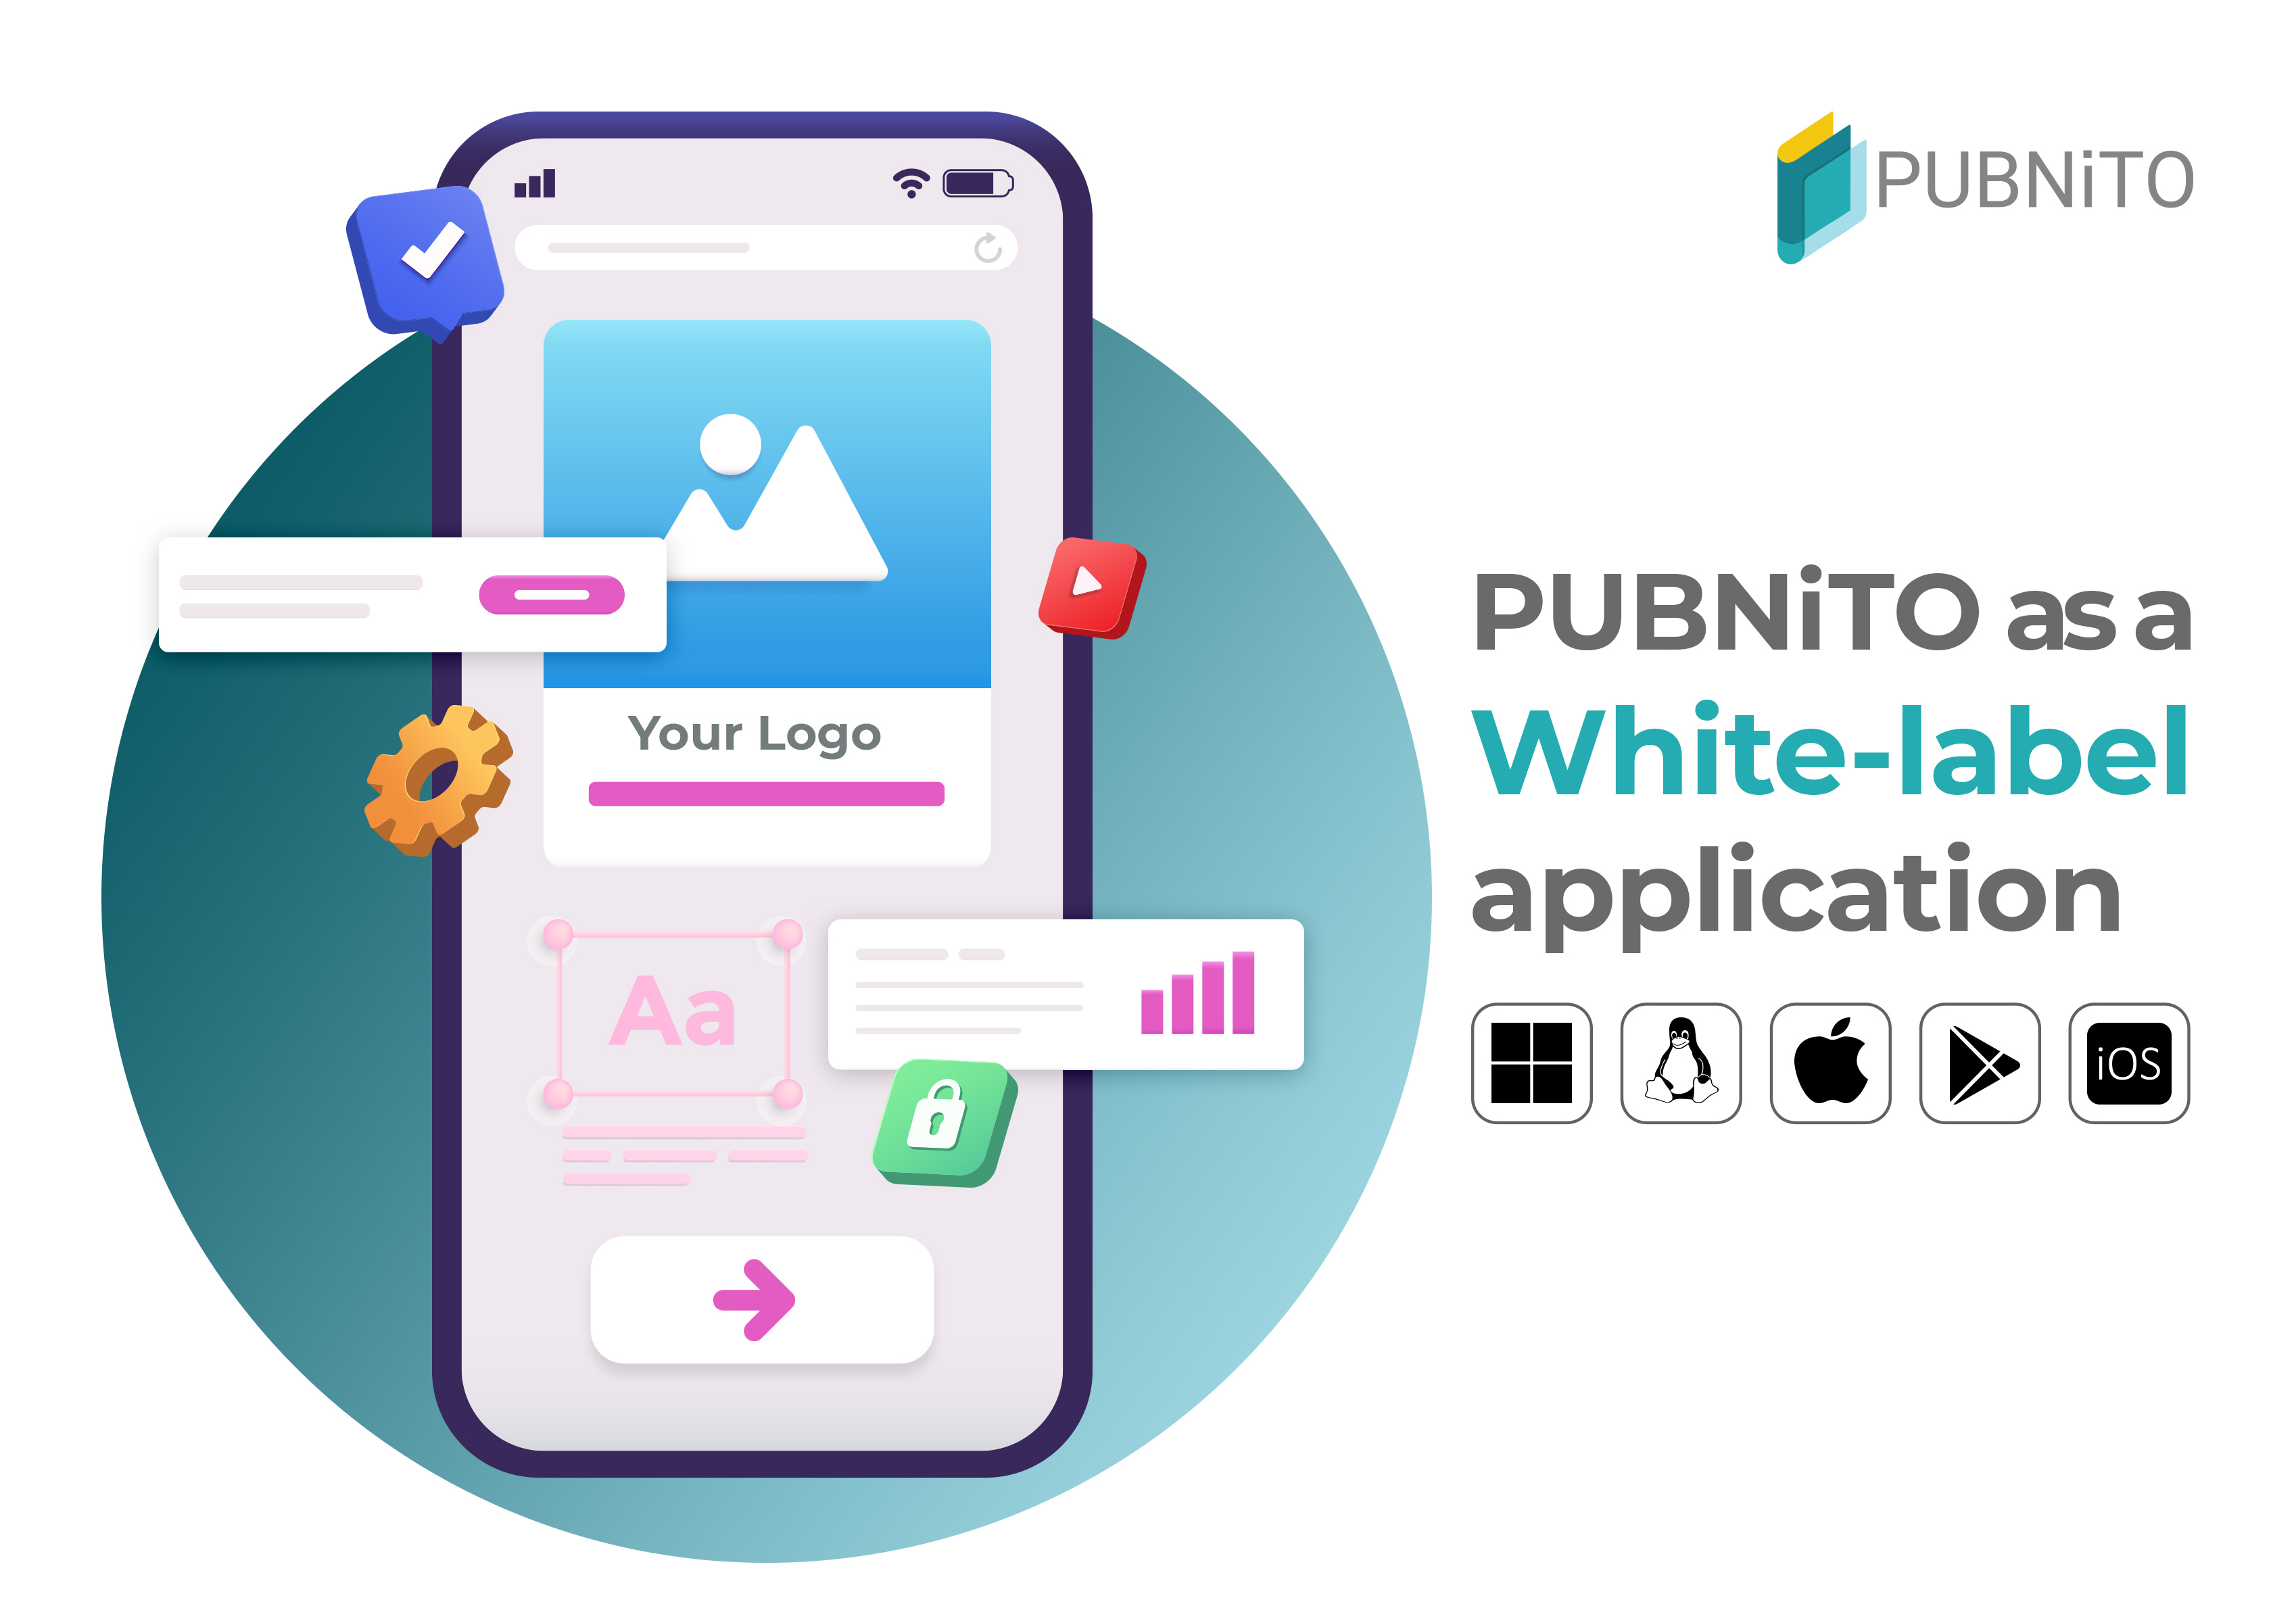 A view of a mobile app to show PUBNiTO's approach to White-label application